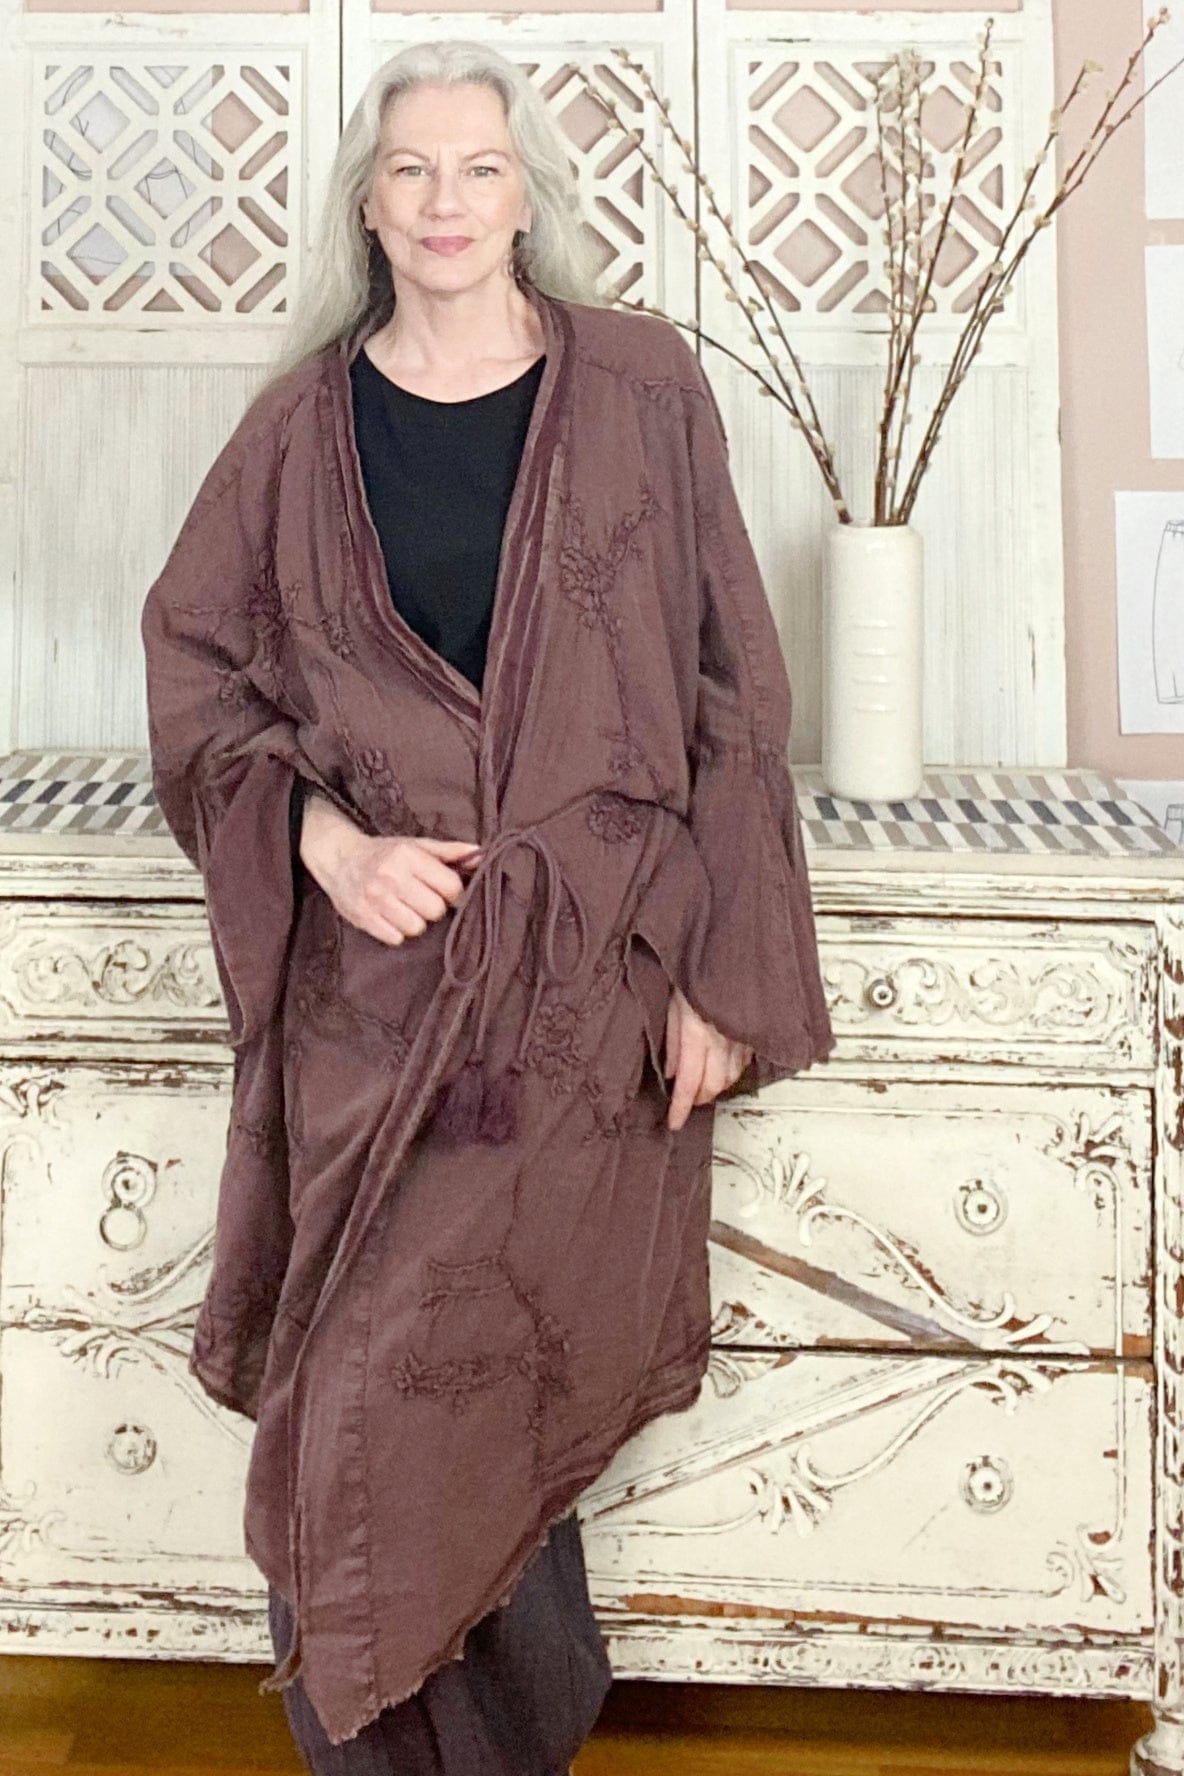 Raisin colored long cotton jacket with embroidery detail worn on a long grey hair woman.